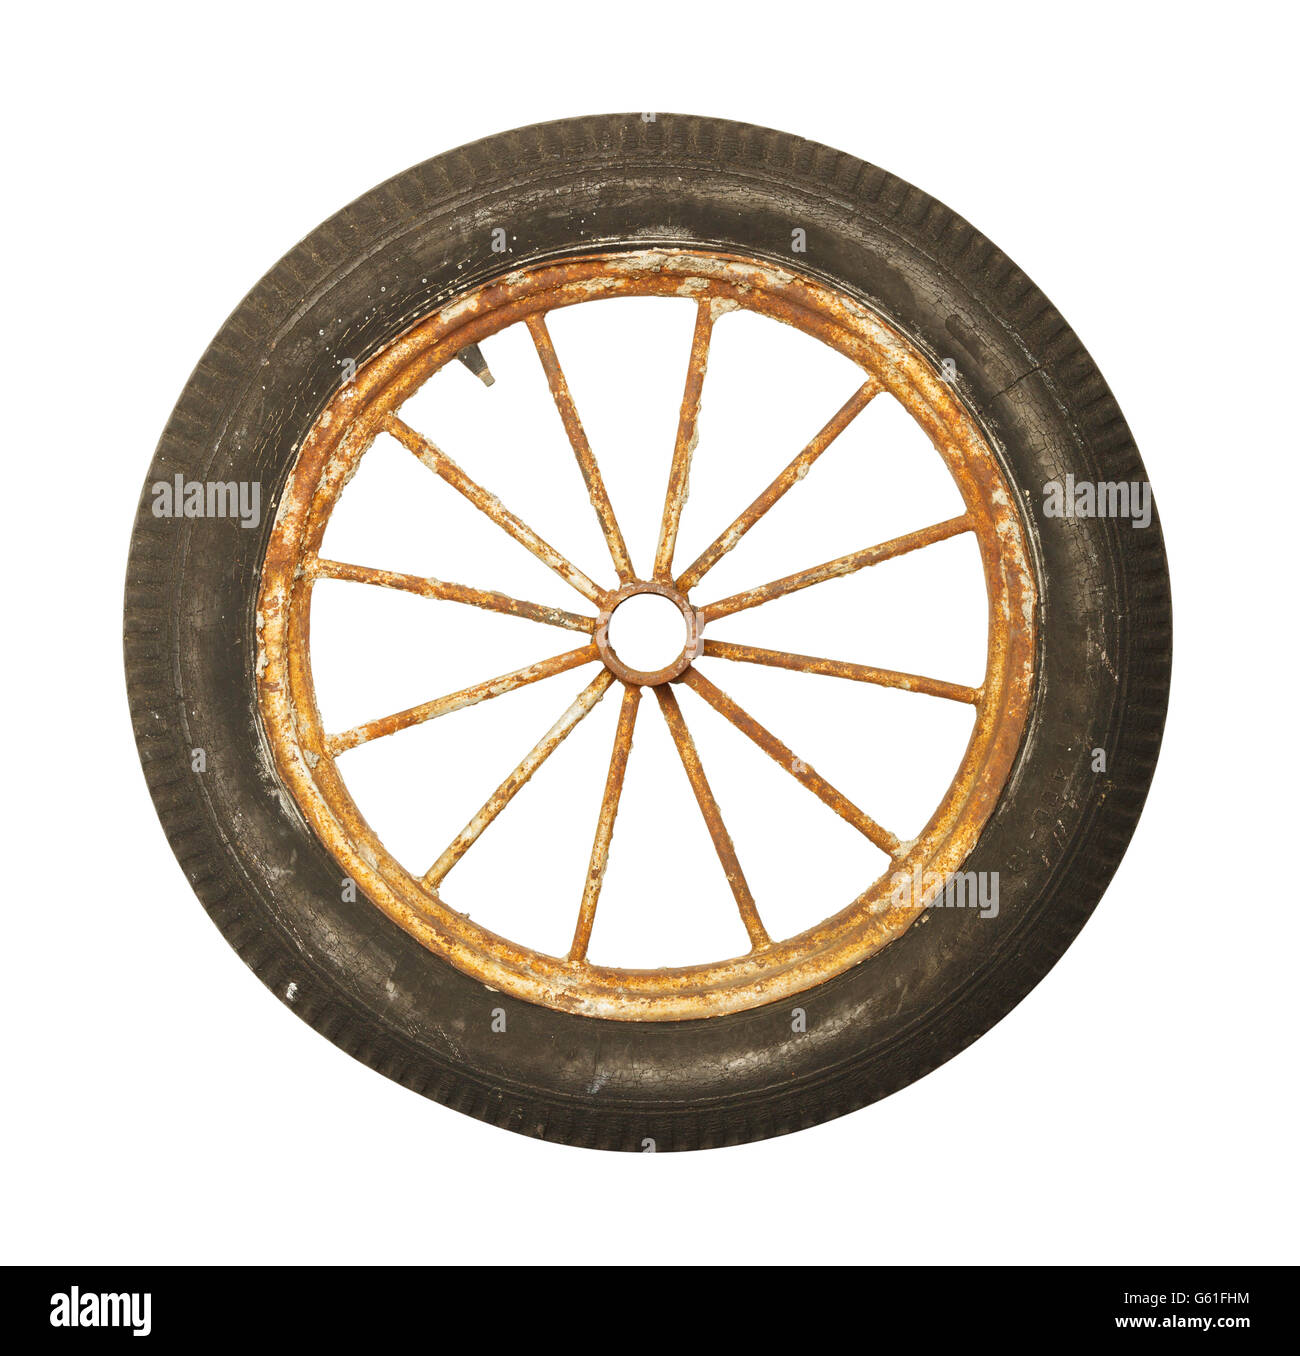 Antique Worn and Rusted Rubber Tire and Spoked Rim Isolated on White Background. Stock Photo